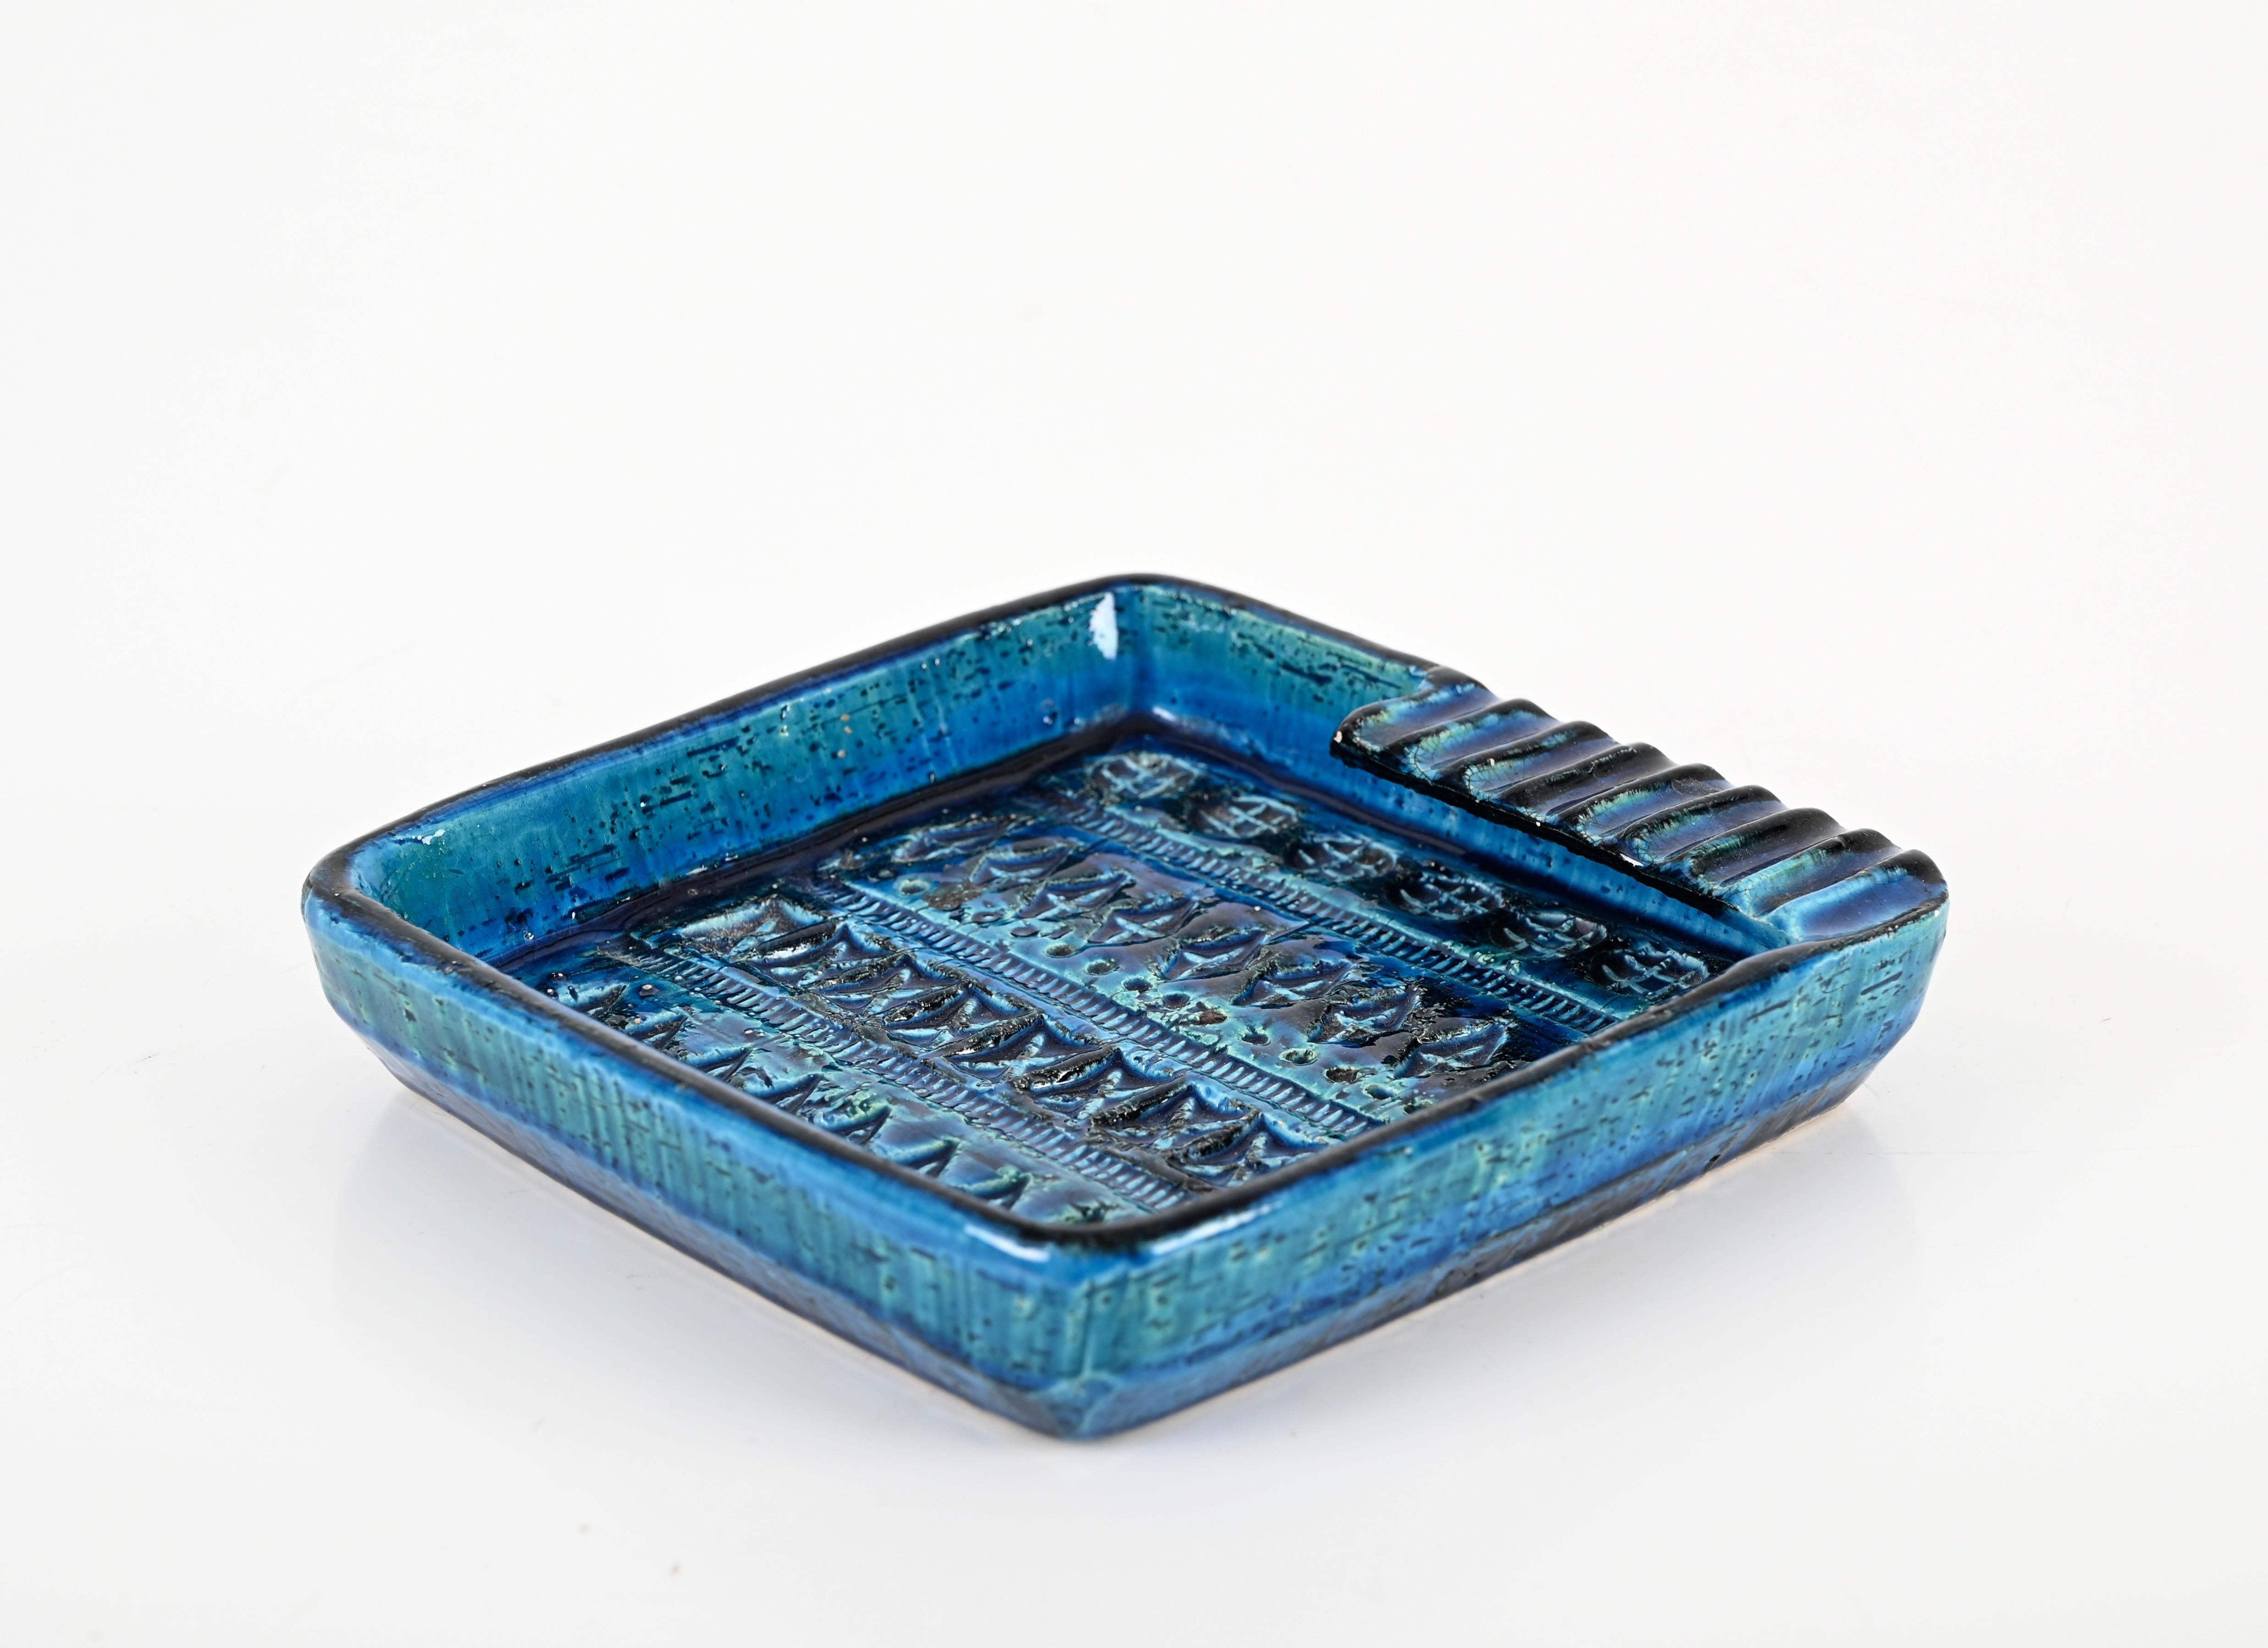 Gorgeous ceramic ashtray or vide-poche in a stunning blue glazed (Rimini Blu) color. This vibrant ceramic item was designed by Aldo Londi and hand-crafted by Bitossi in Italy during the 1960s. 

An elegant and unique object, in amazing conditions,